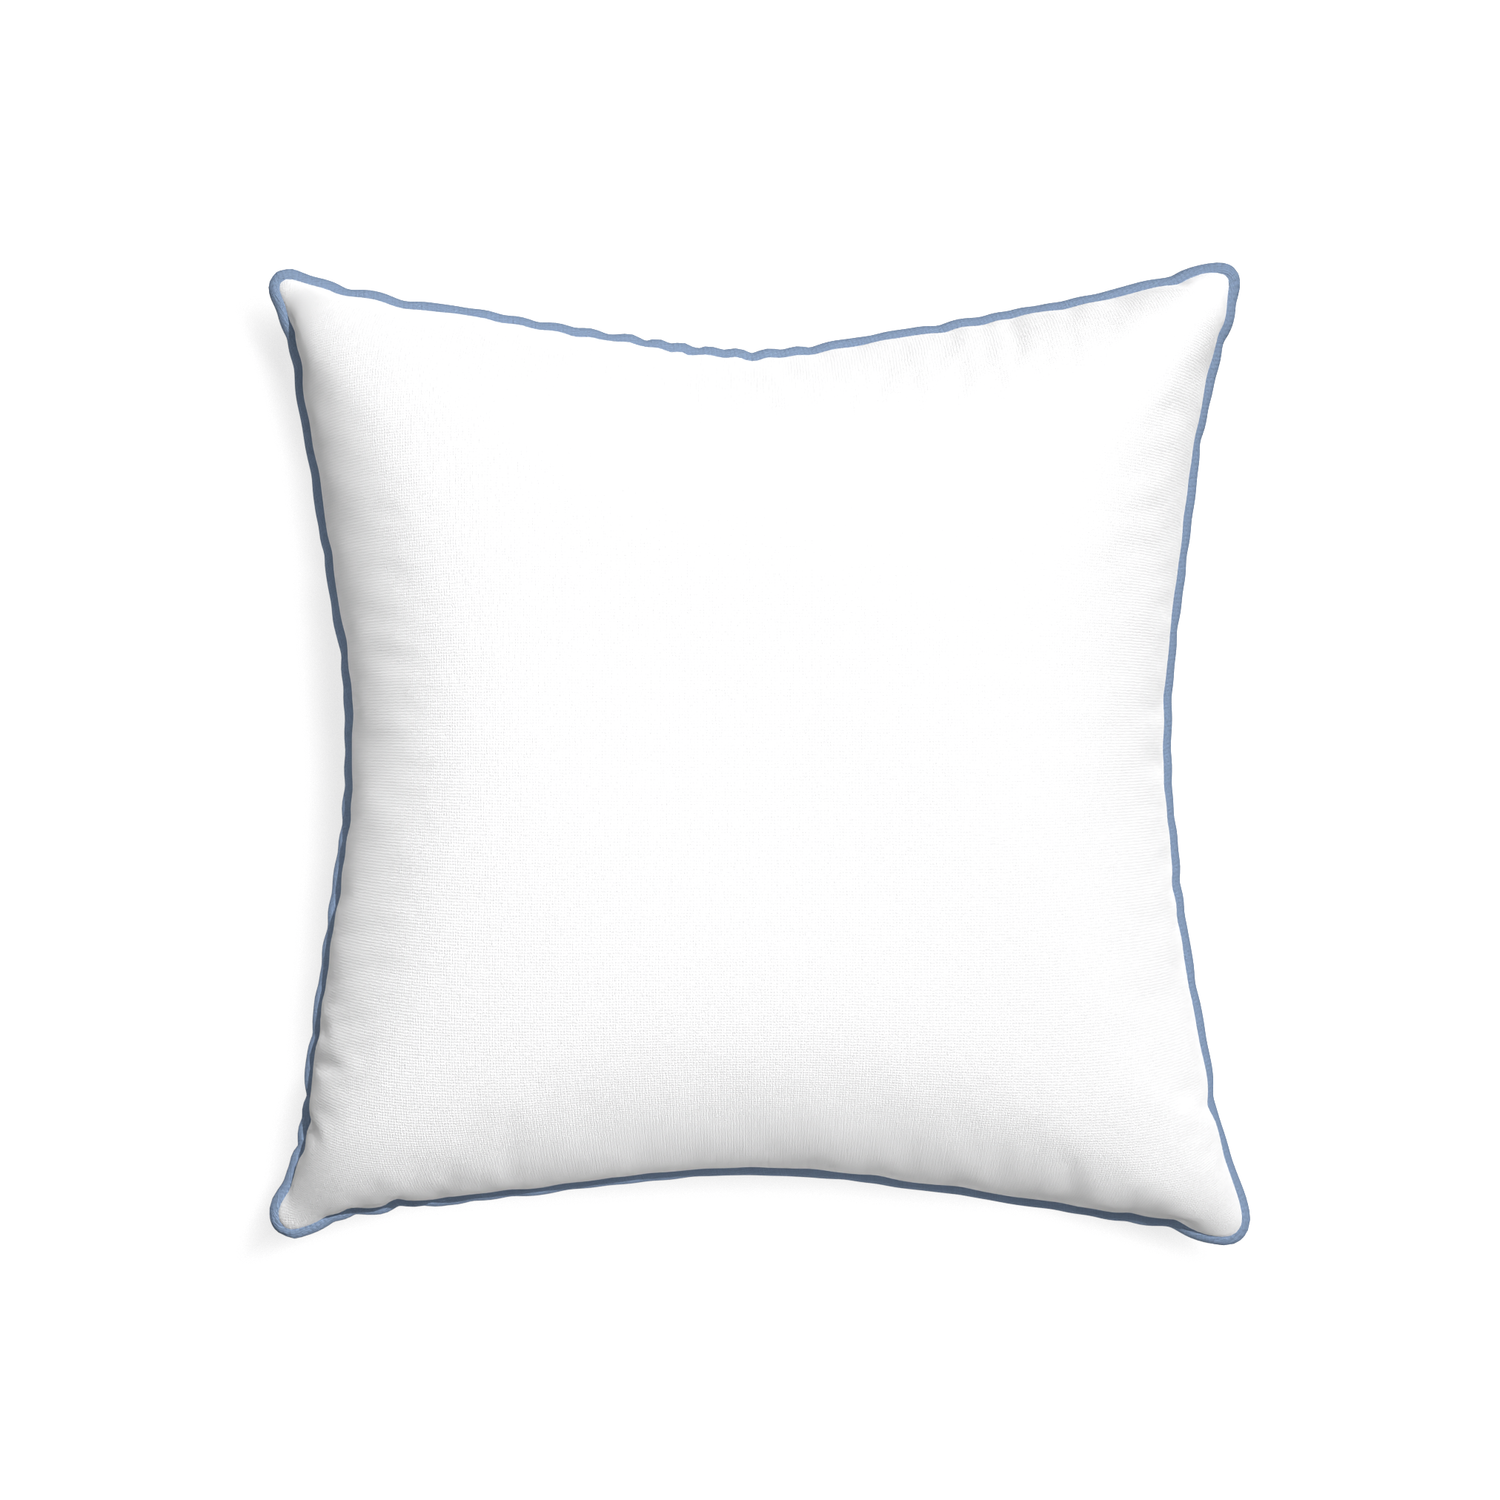 22-square snow custom pillow with sky piping on white background